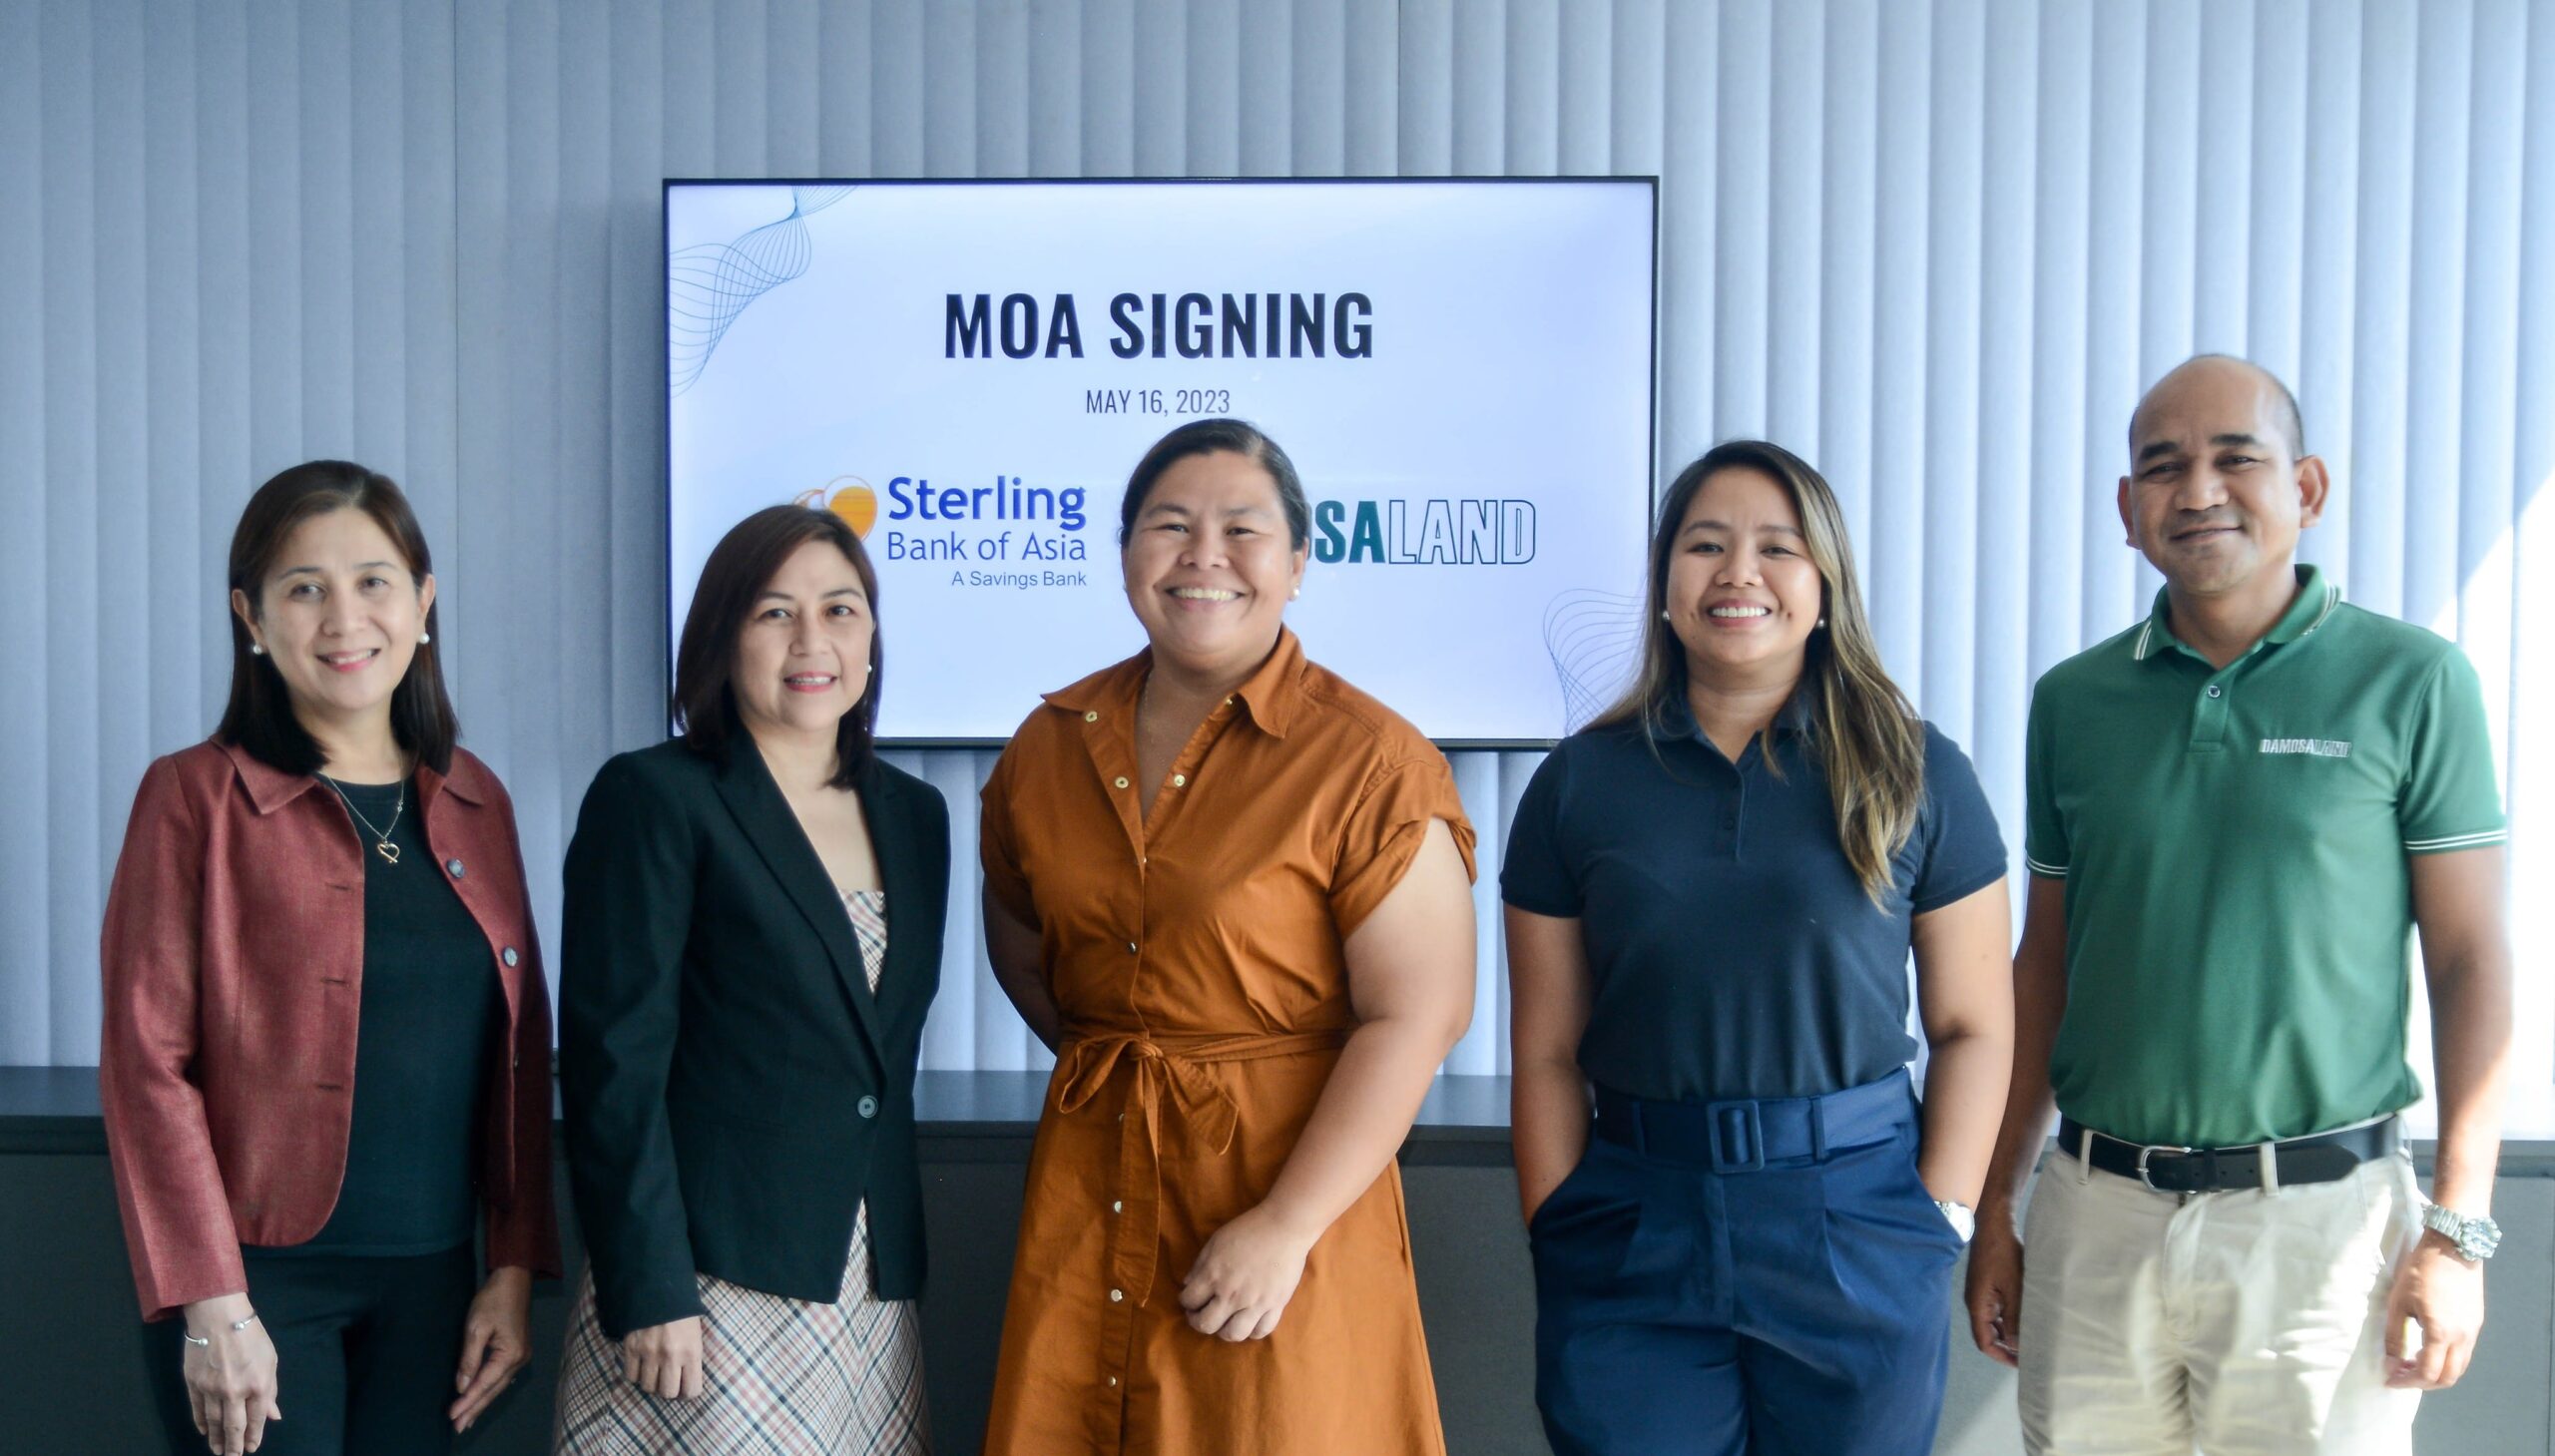 moa signing agreement-min